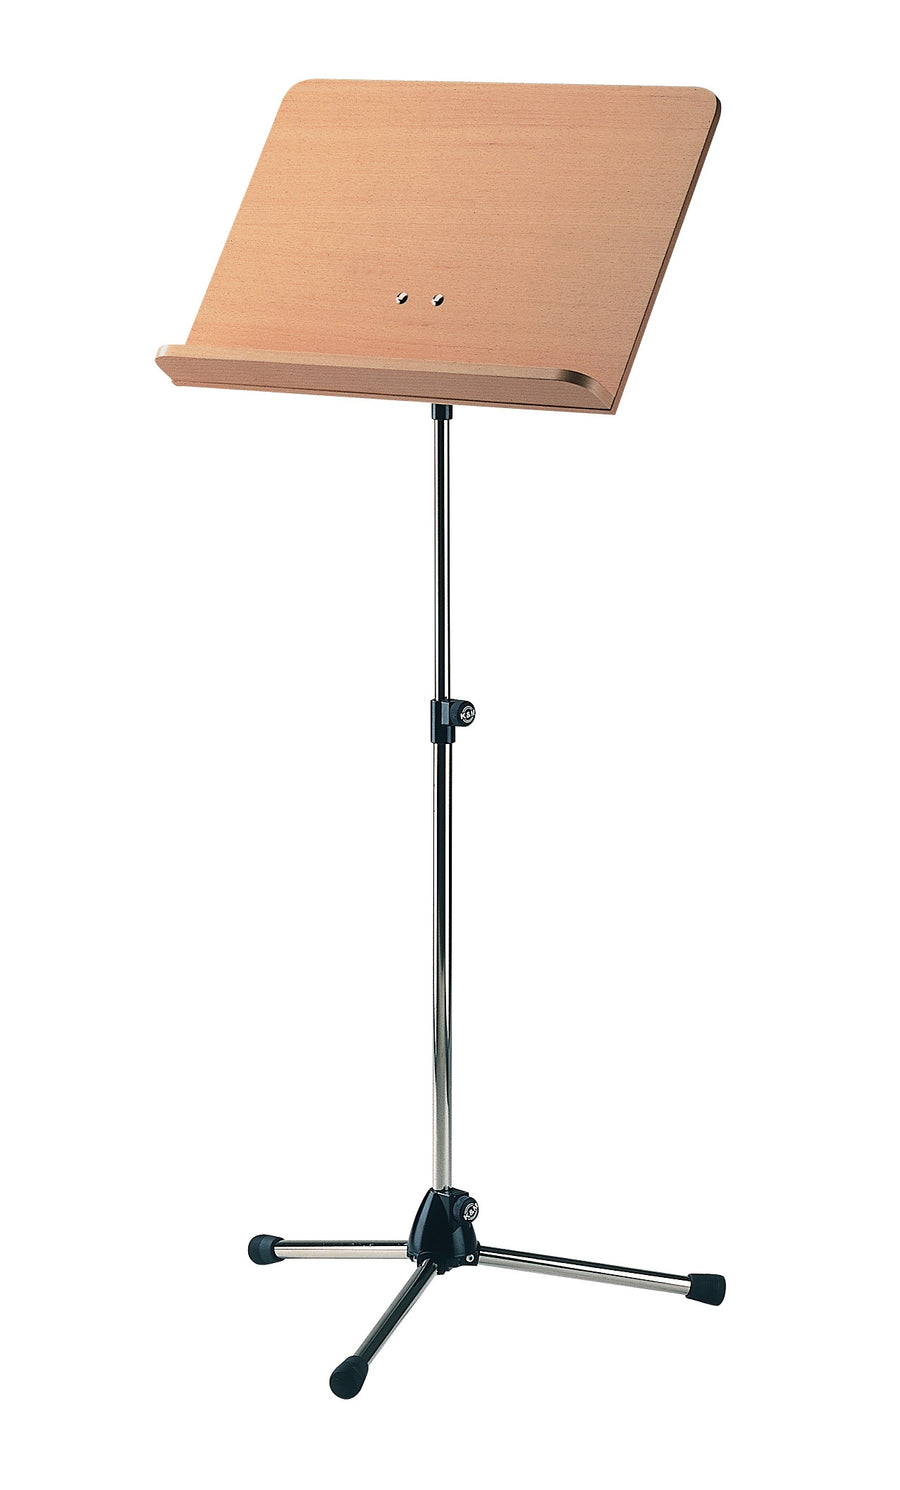 K & M 118/1 Orchestra music stand